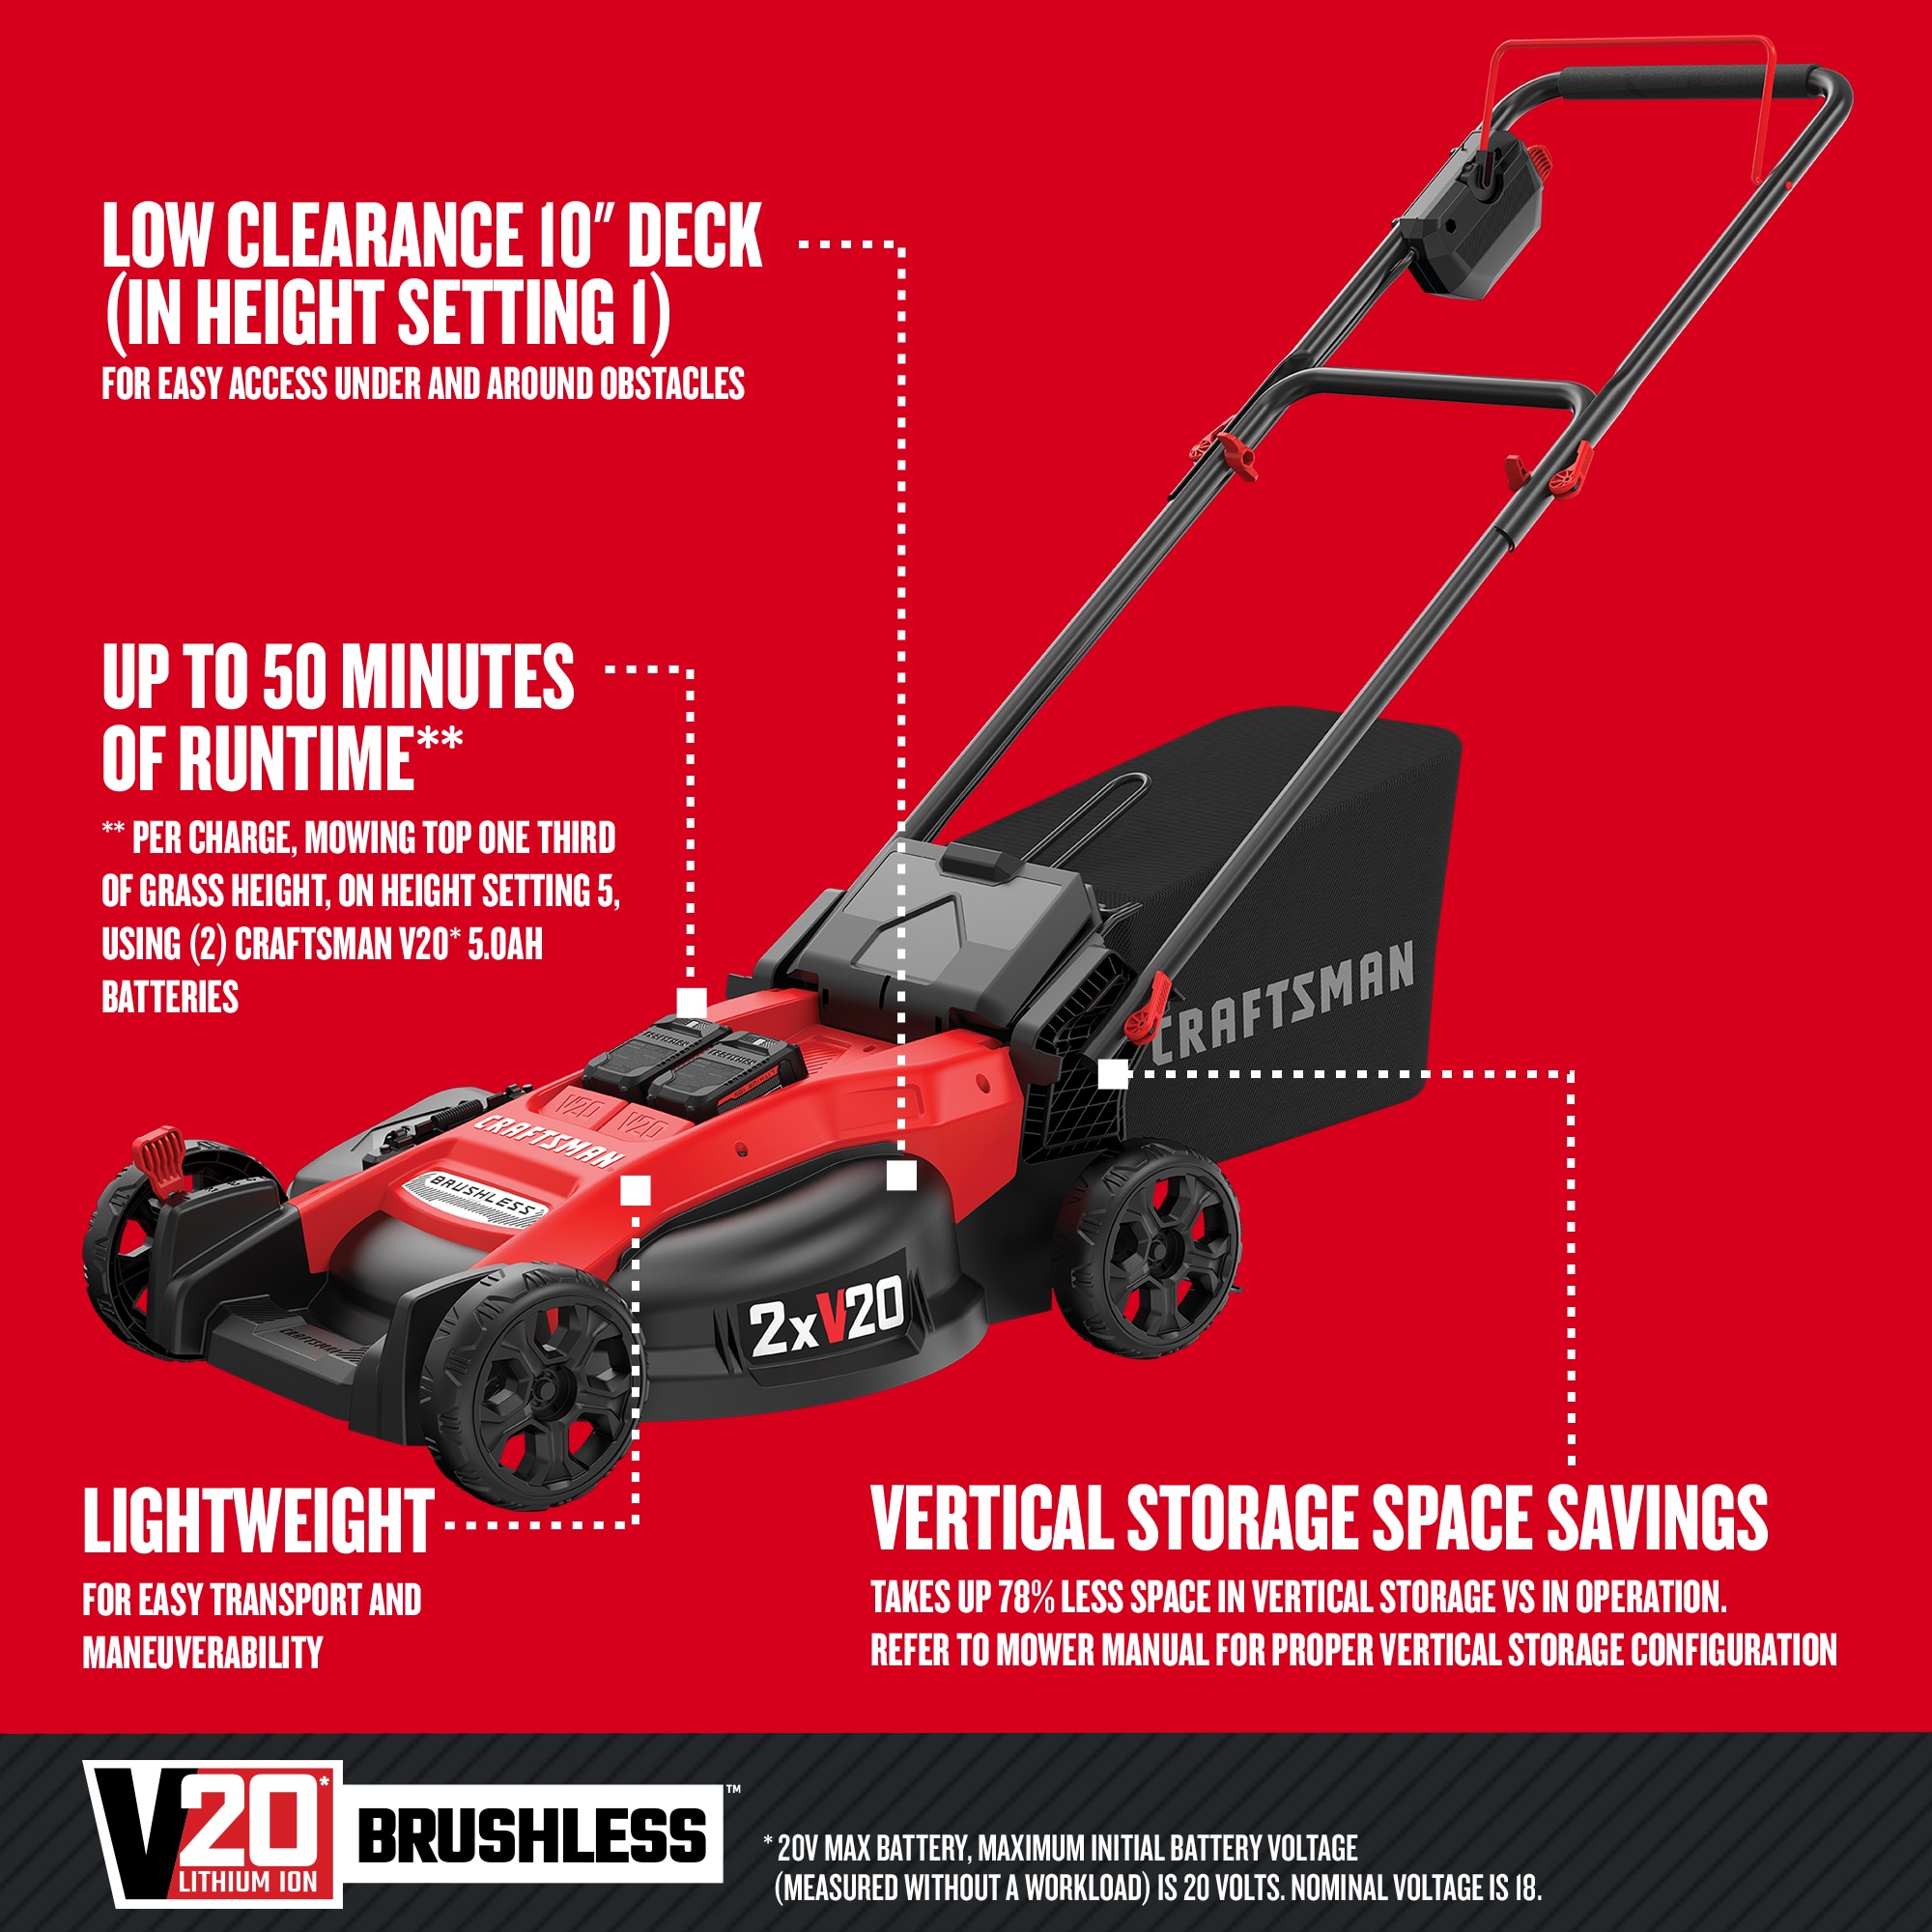 BLACK+DECKER 20-volt Max 12-in Cordless Push Lawn Mower 2 Ah (Battery and  Charger Included) in the Cordless Electric Push Lawn Mowers department at